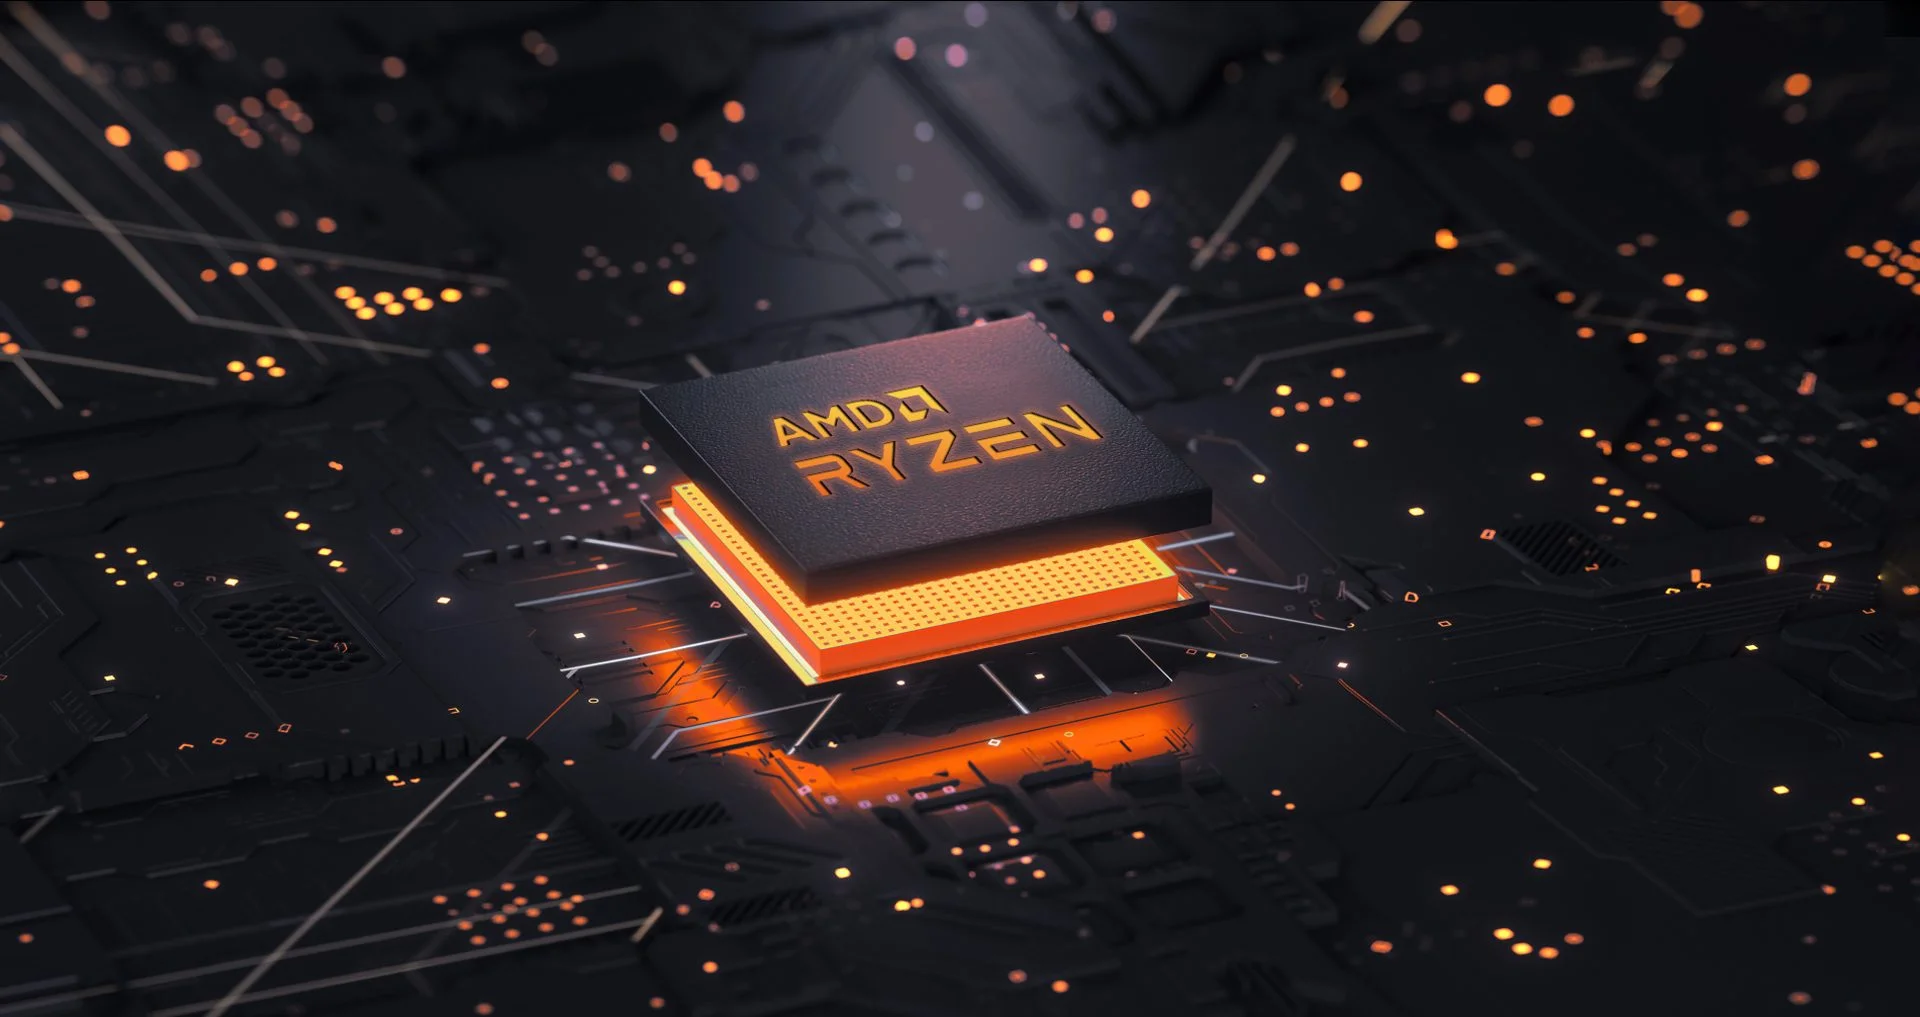 AMD plans to release a budget version of the gaming "3D processor"